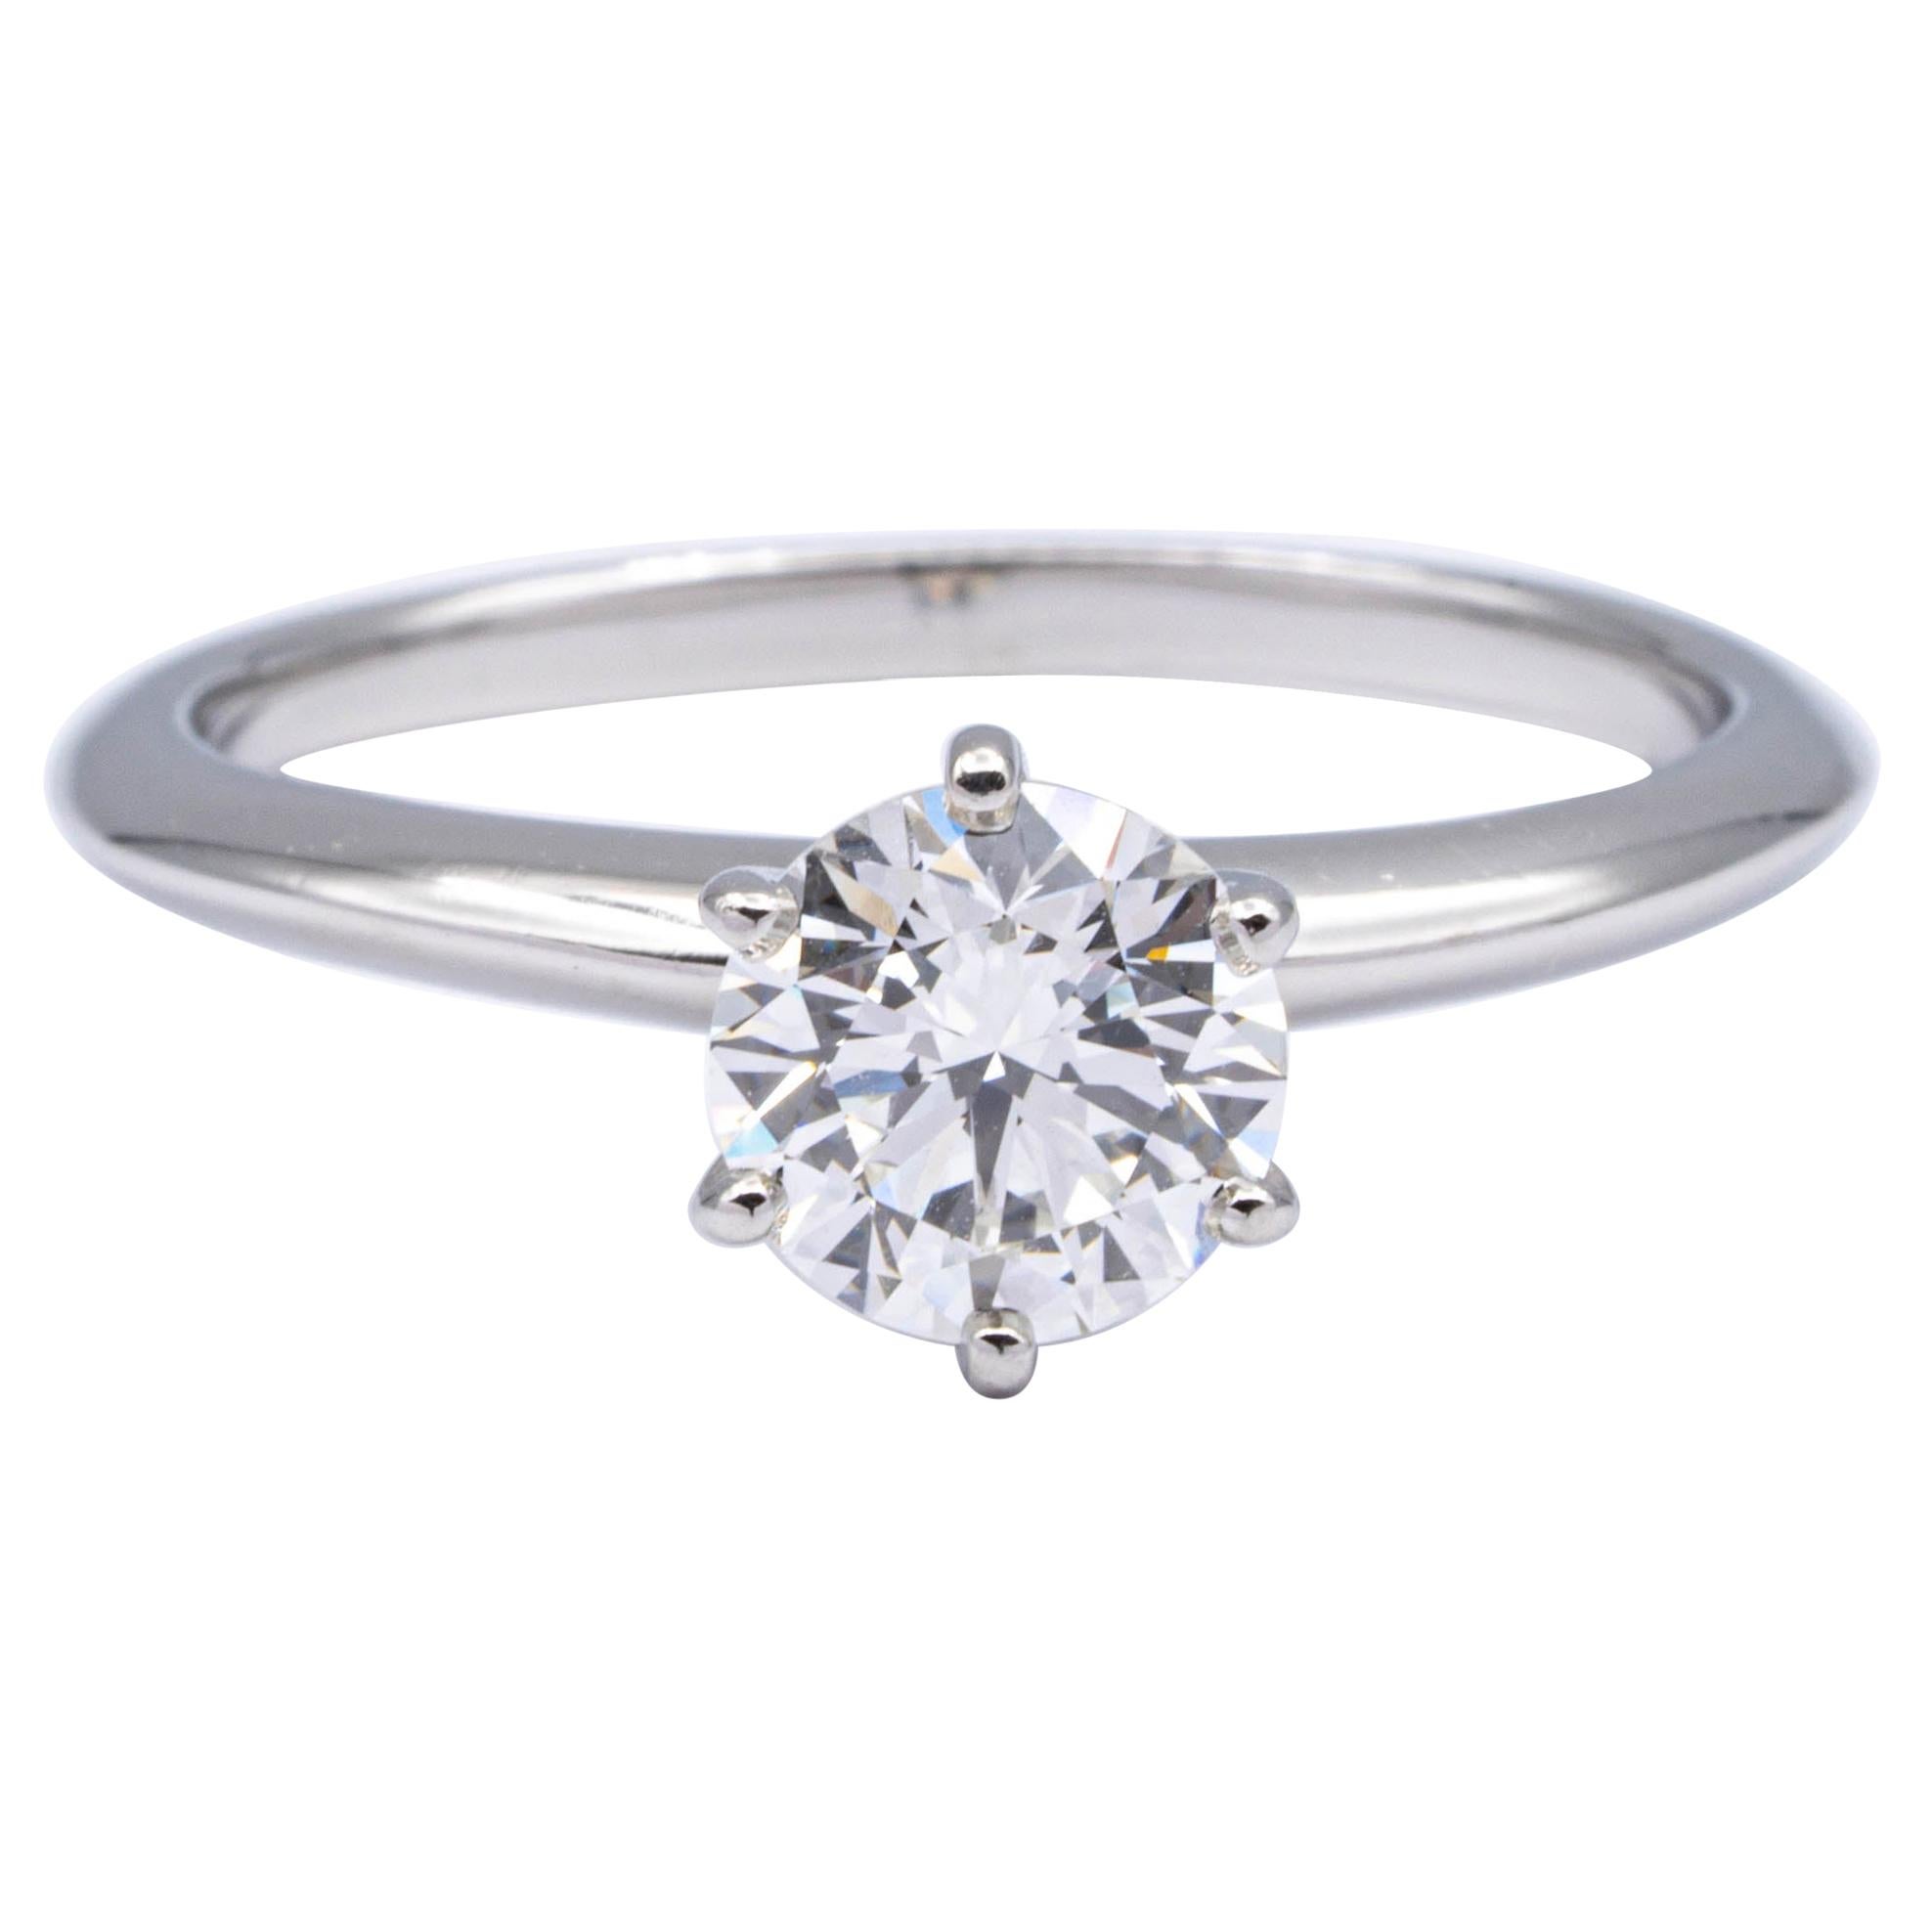 Tiffany & Co. Engagement Ring with Round 1.26 Carat IVVS2 Plat